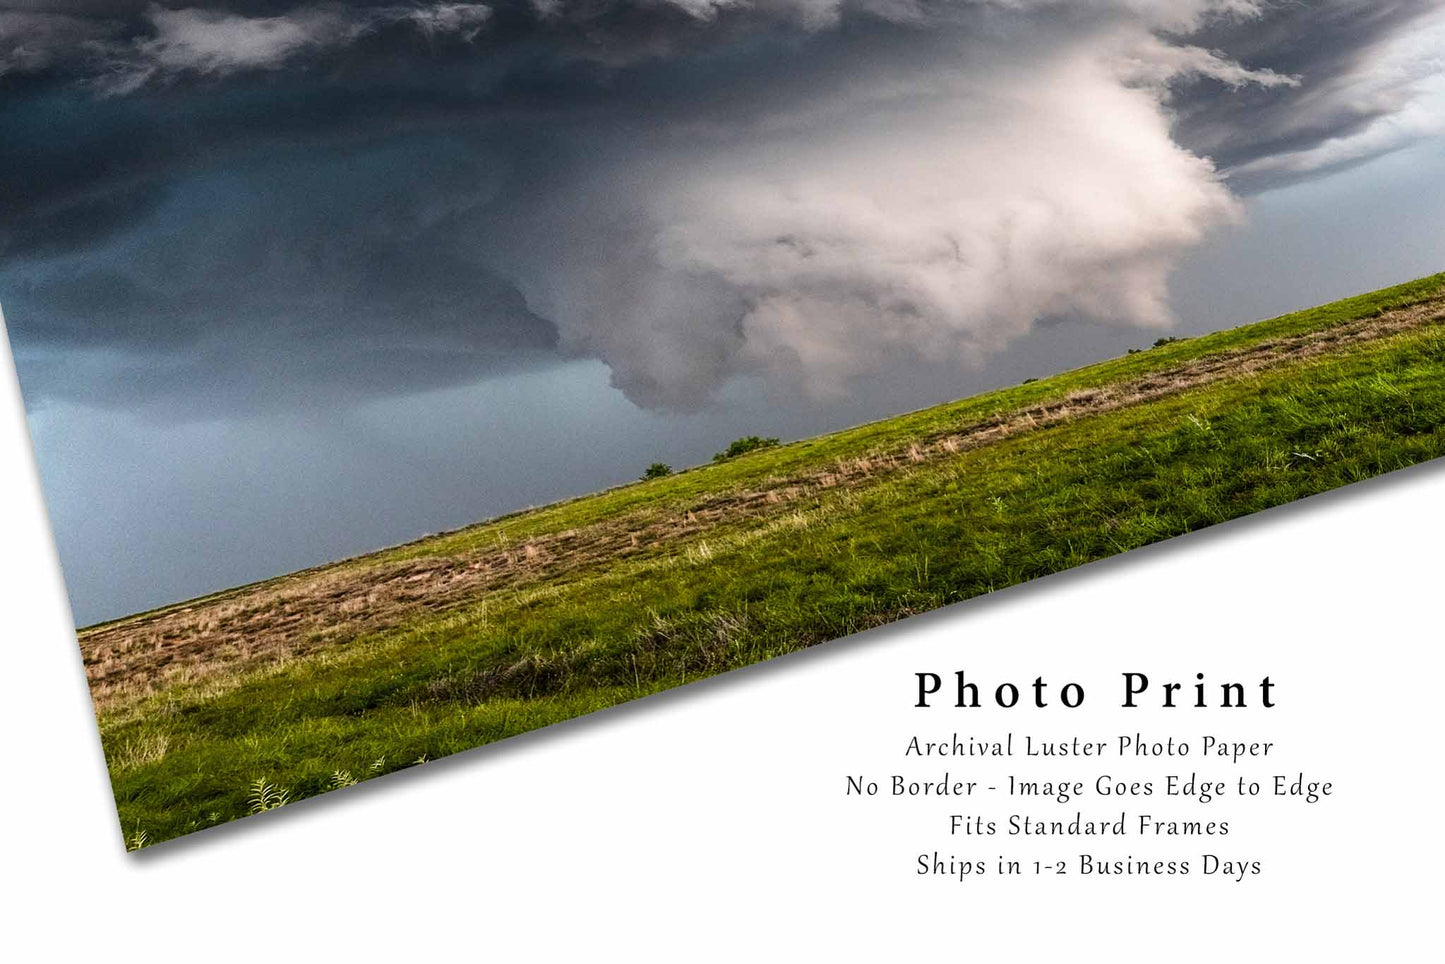 Supercell Thunderstorm Photo Print | Storm Picture | Oklahoma Wall Art | Extreme Weather Photography | Nature Decor